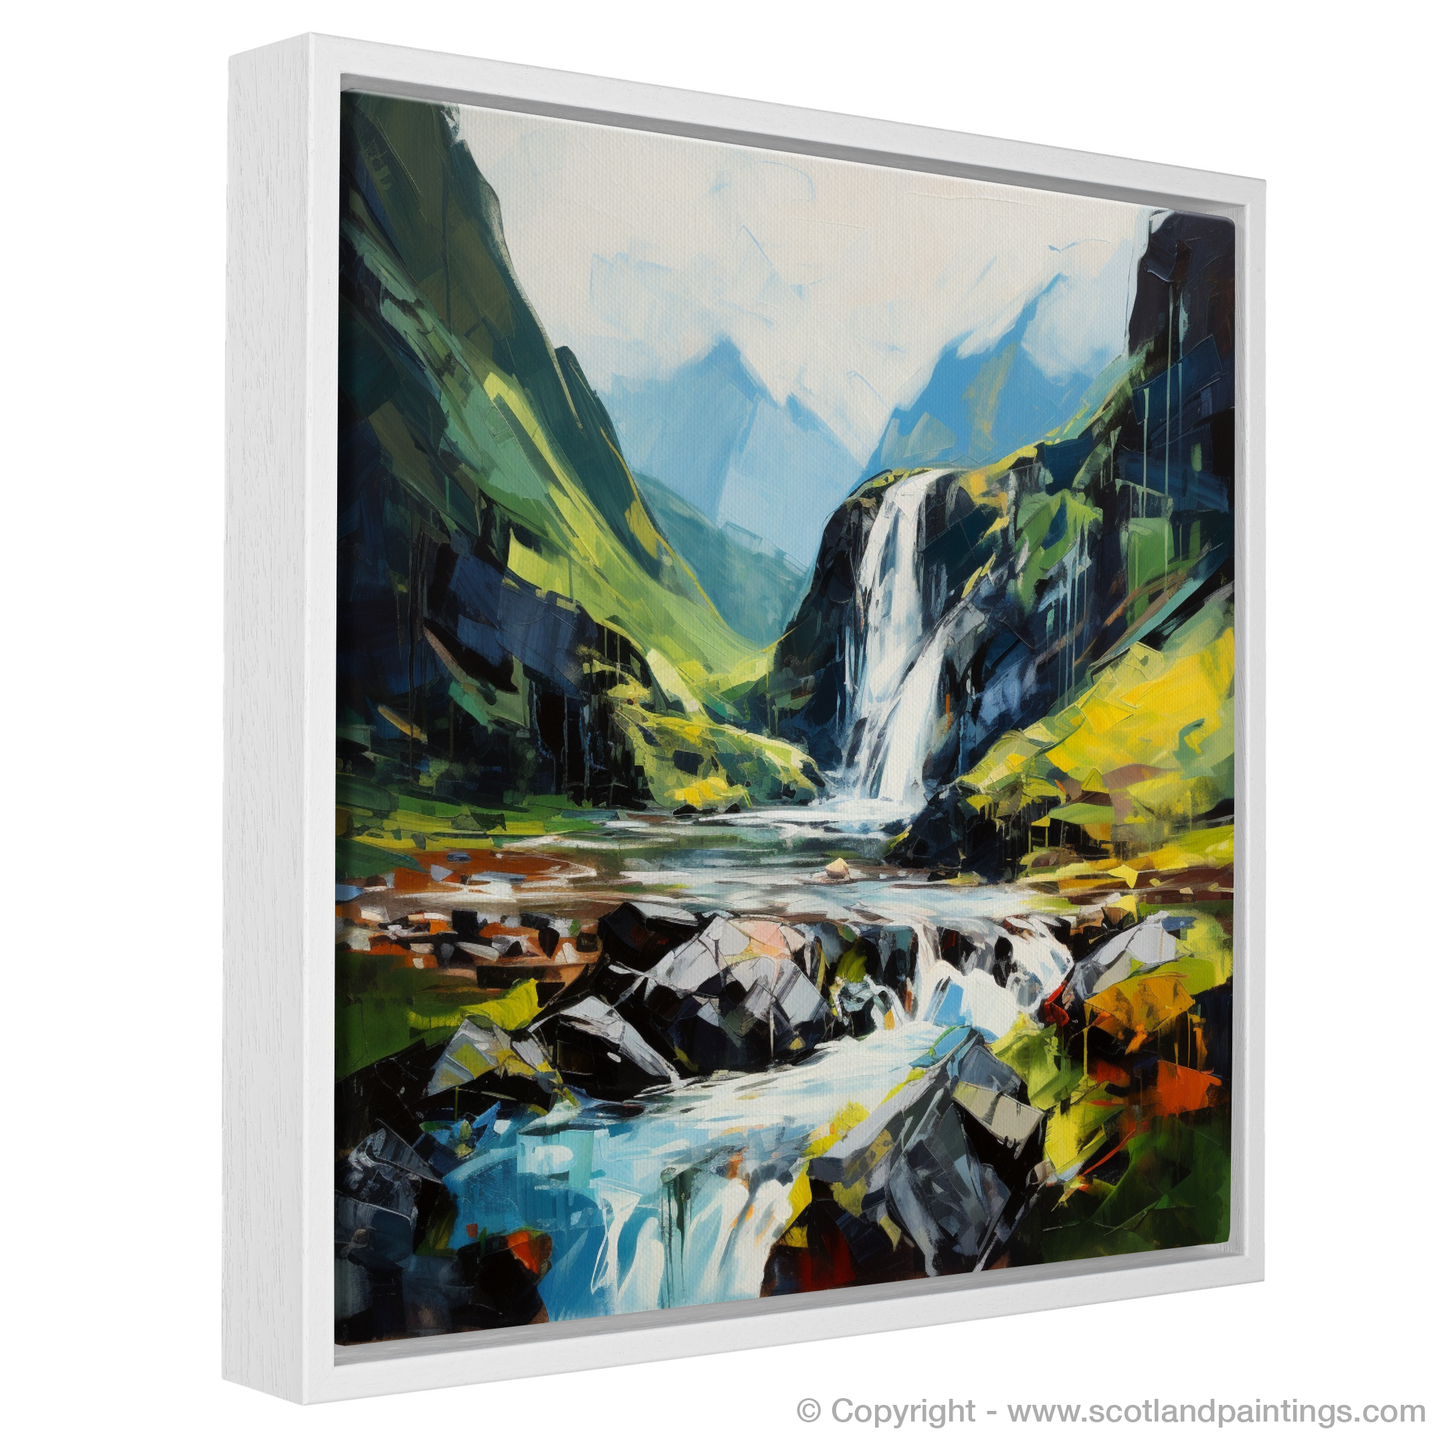 Painting and Art Print of Cascading waterfall in Glencoe entitled "Cascading Majesty: An Expressionist Homage to Glencoe's Waterfall".